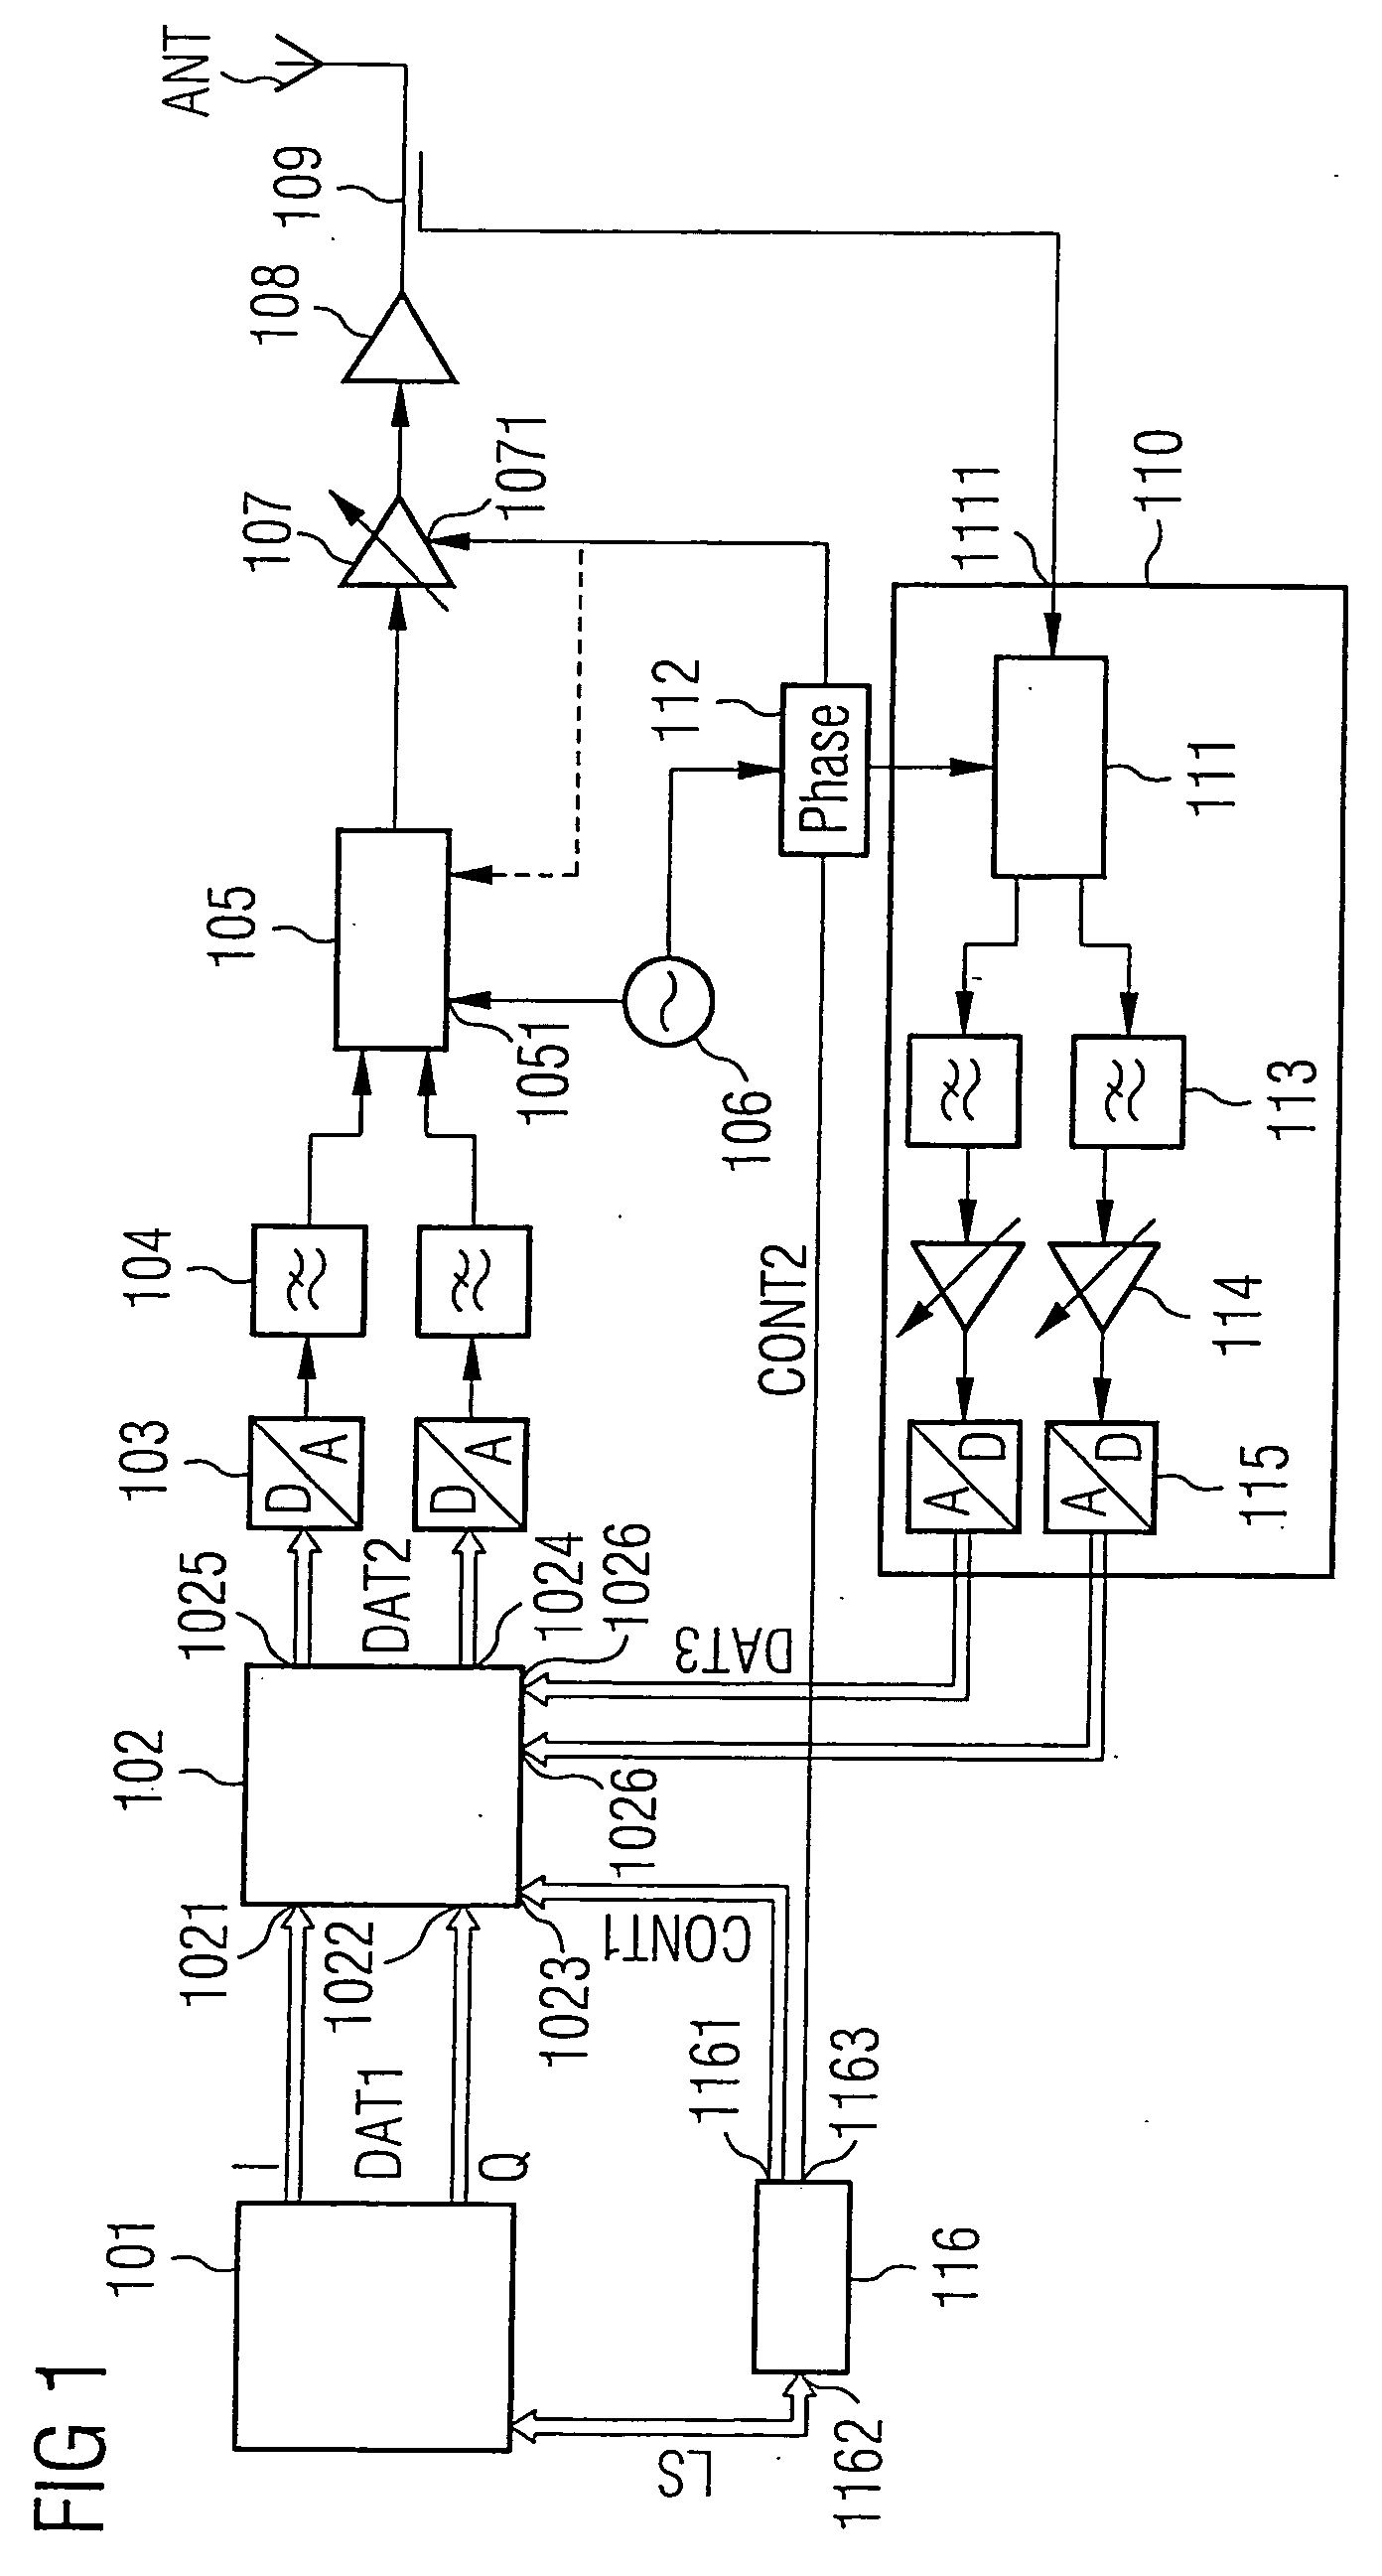 Transmission device with adaptive digital predistortion, transceiver with transmission device, and method for operating a transmission device